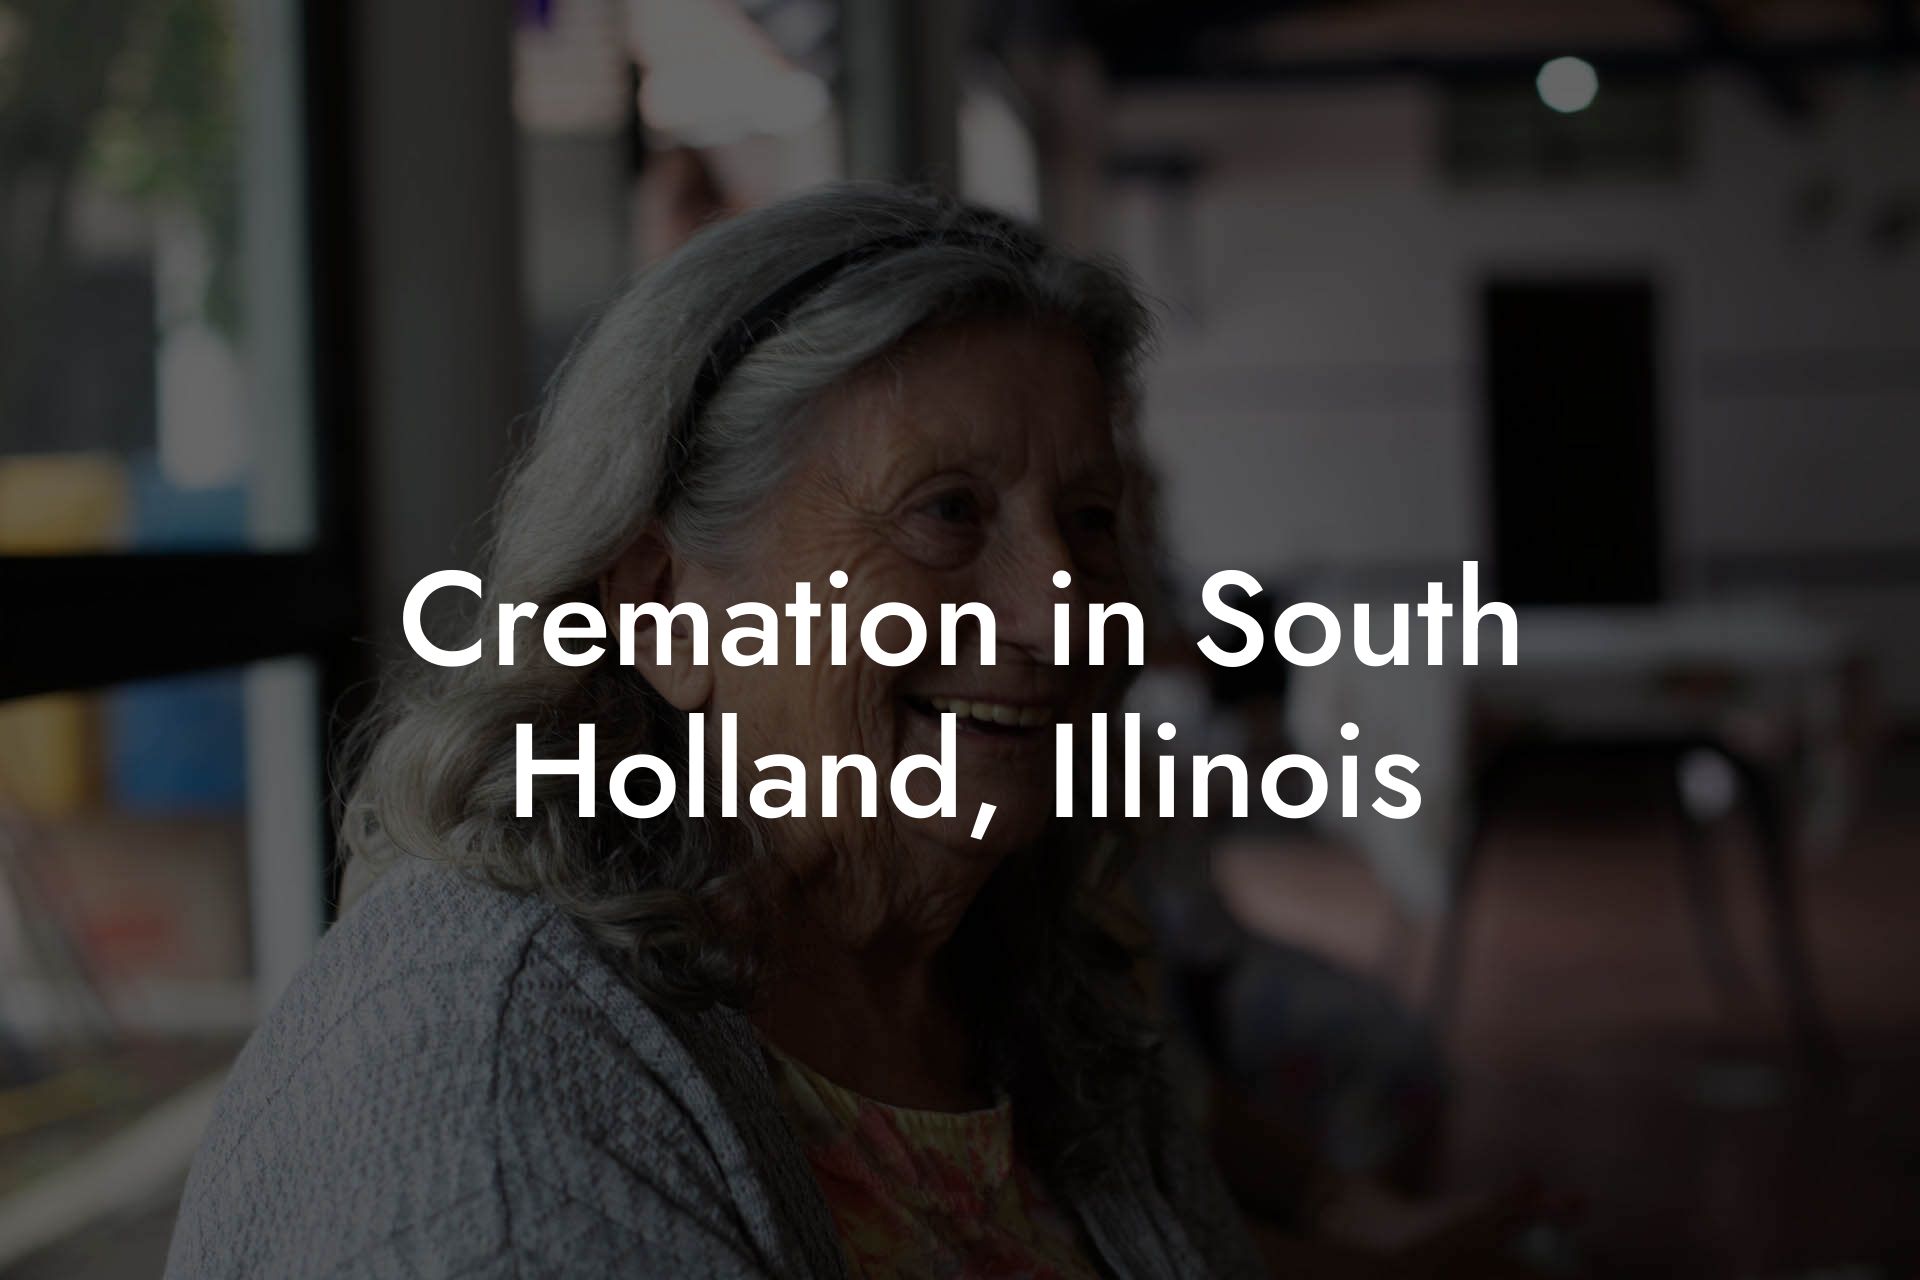 Cremation in South Holland, Illinois